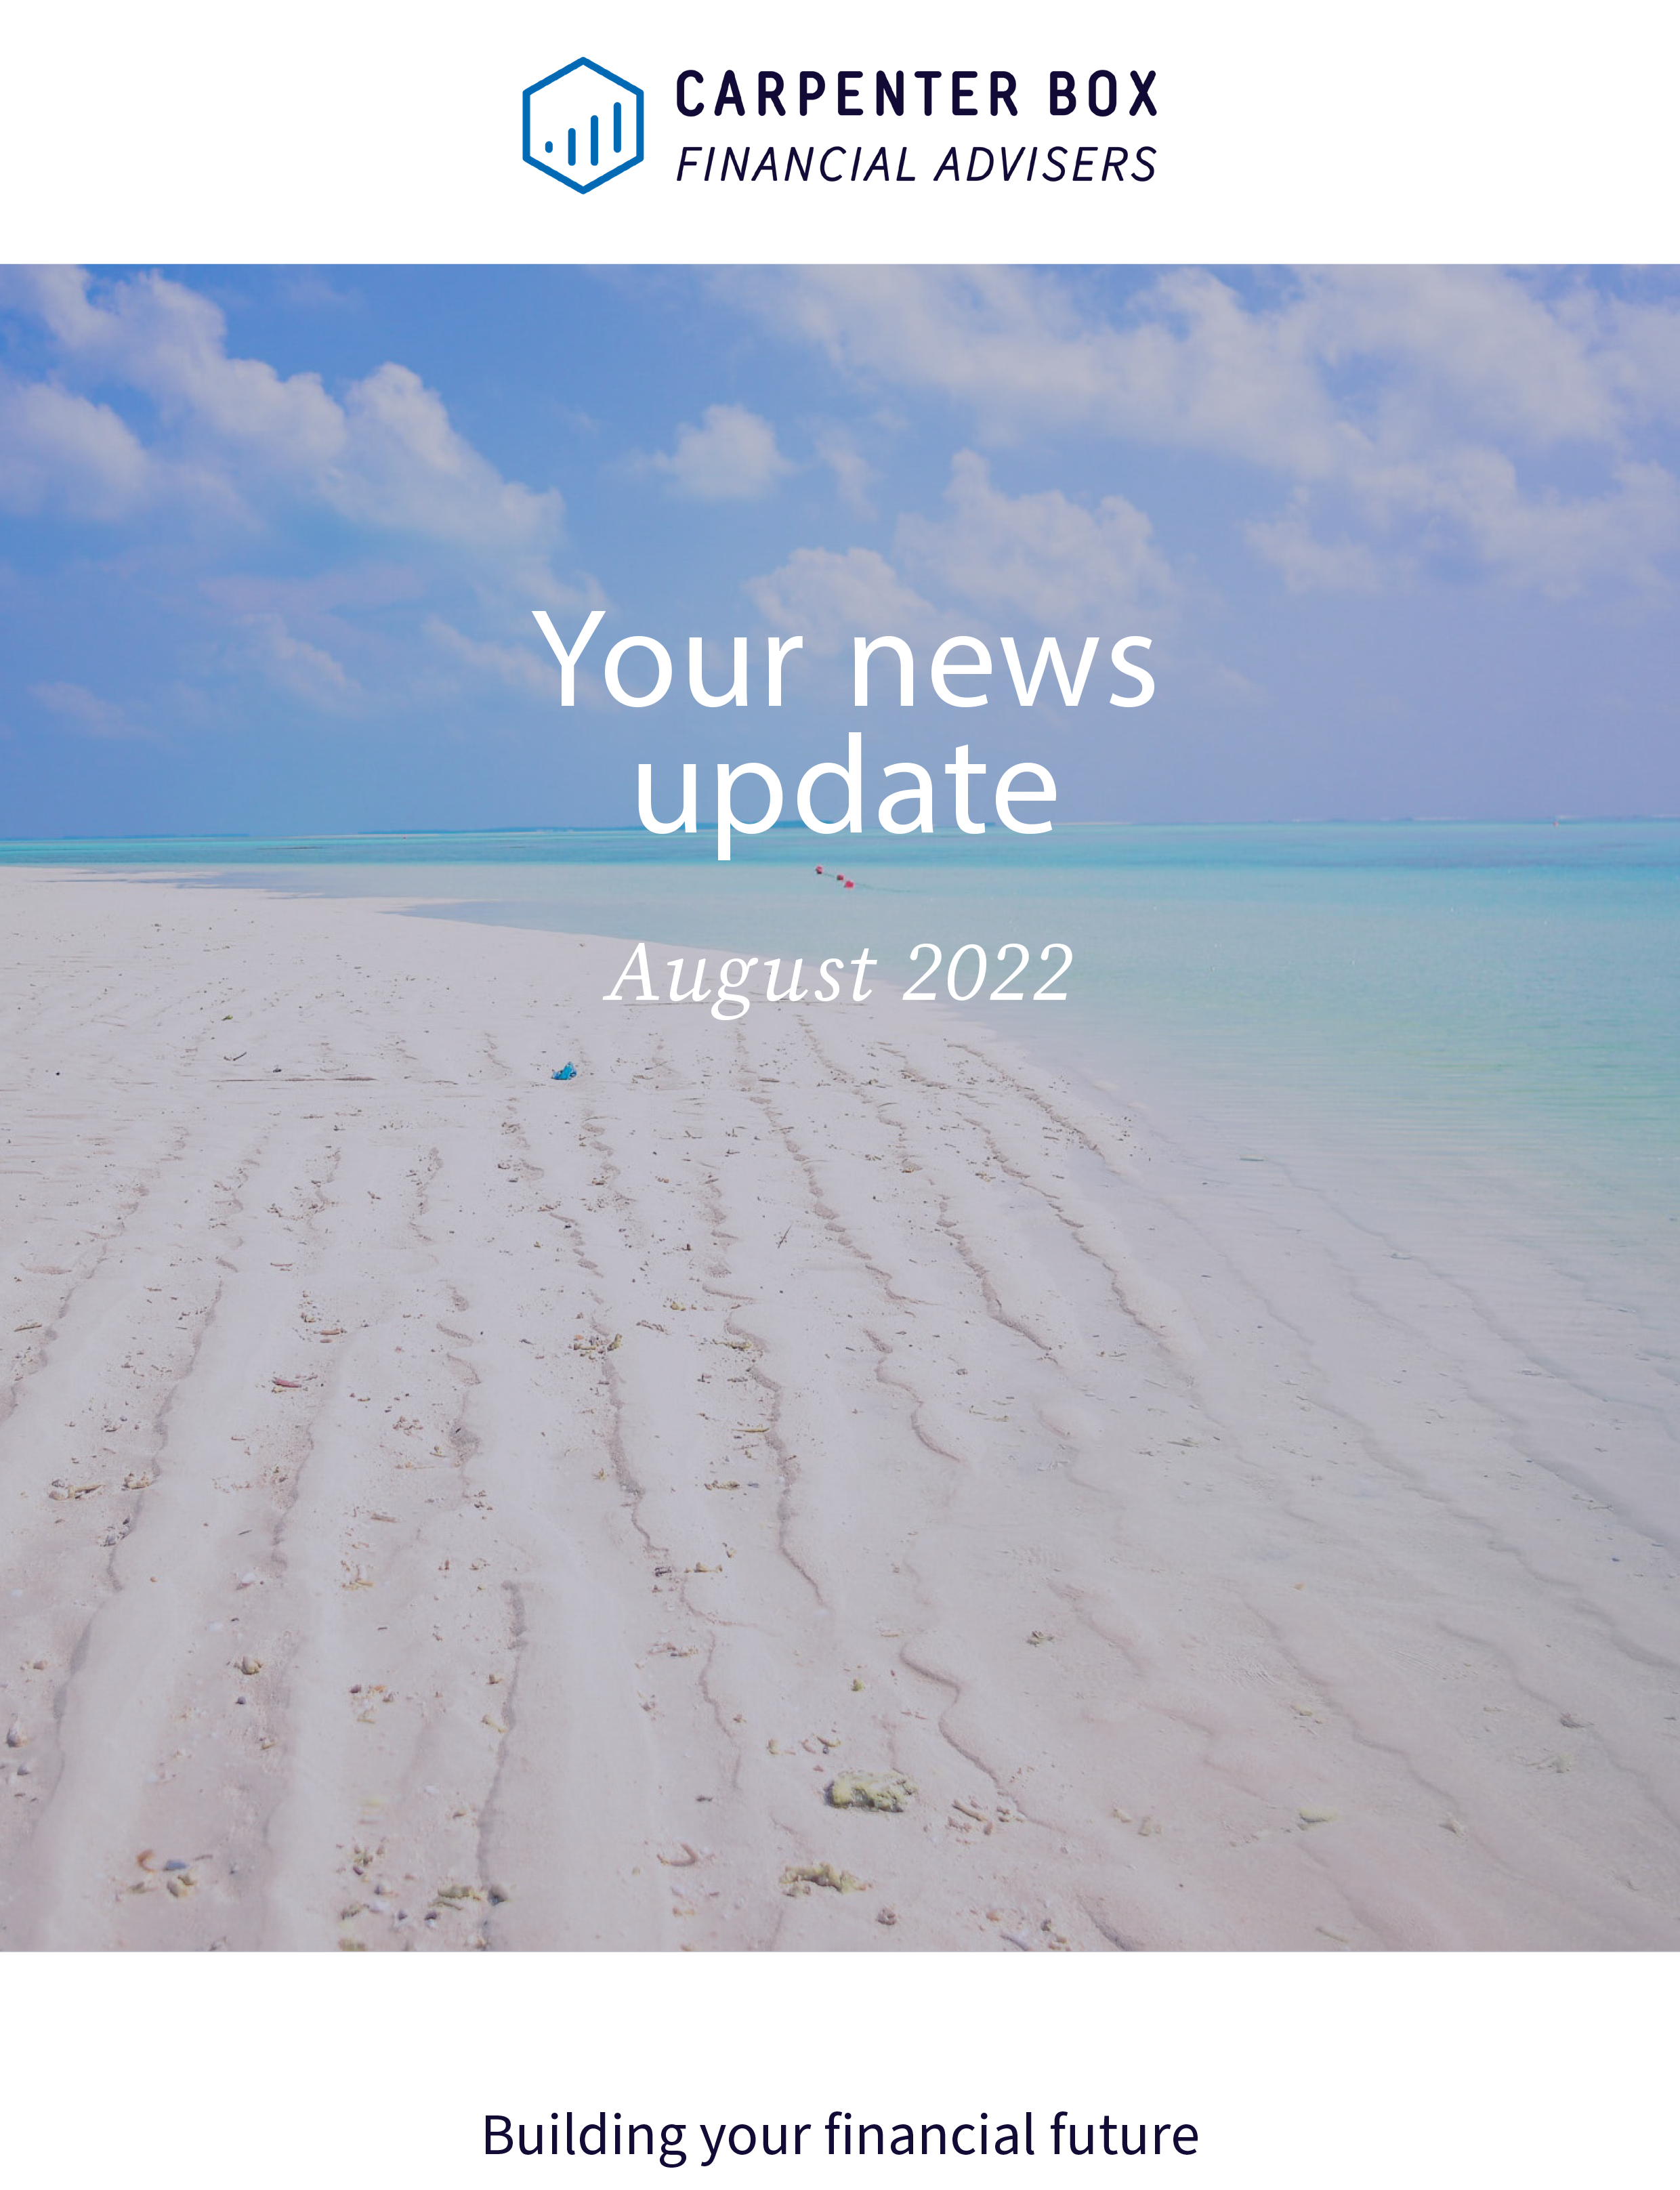 Financial Advisers update August 2022